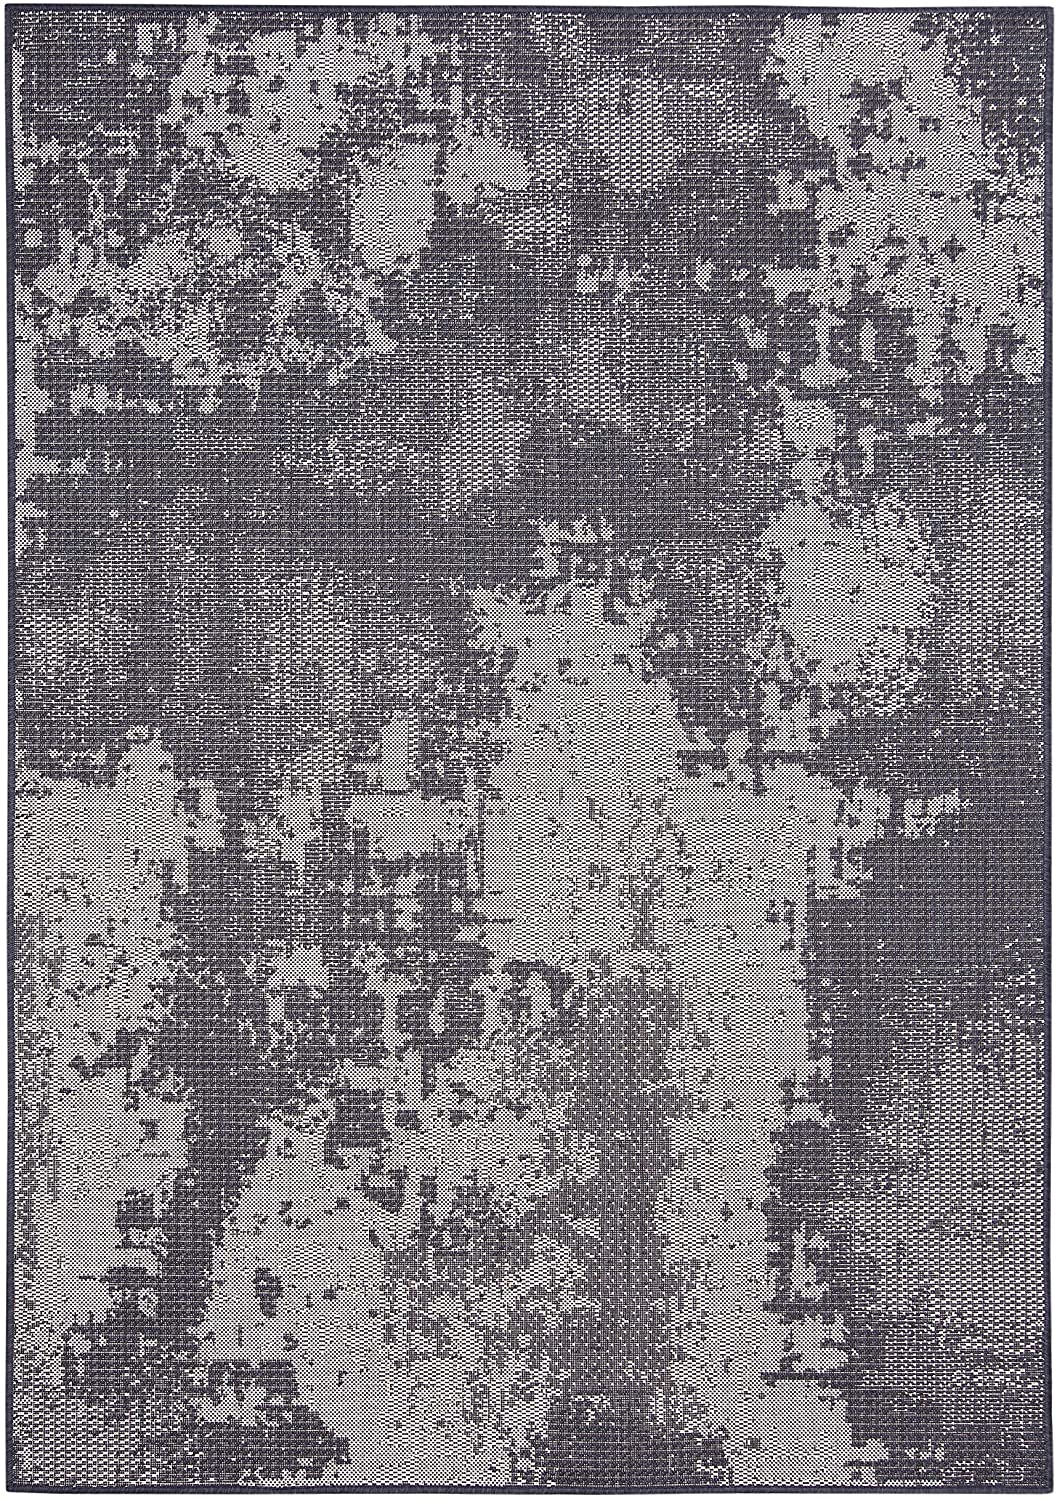 Abstract Vintage Rug - 5 ft. 3 in. x 7 ft. 6 in., Charcoal Gray, Indoor/Outdoor Area Rug with Distressed Pattern, Stain Resistant, Washable Rug | Stylish Area Rugs - image 1 of 8